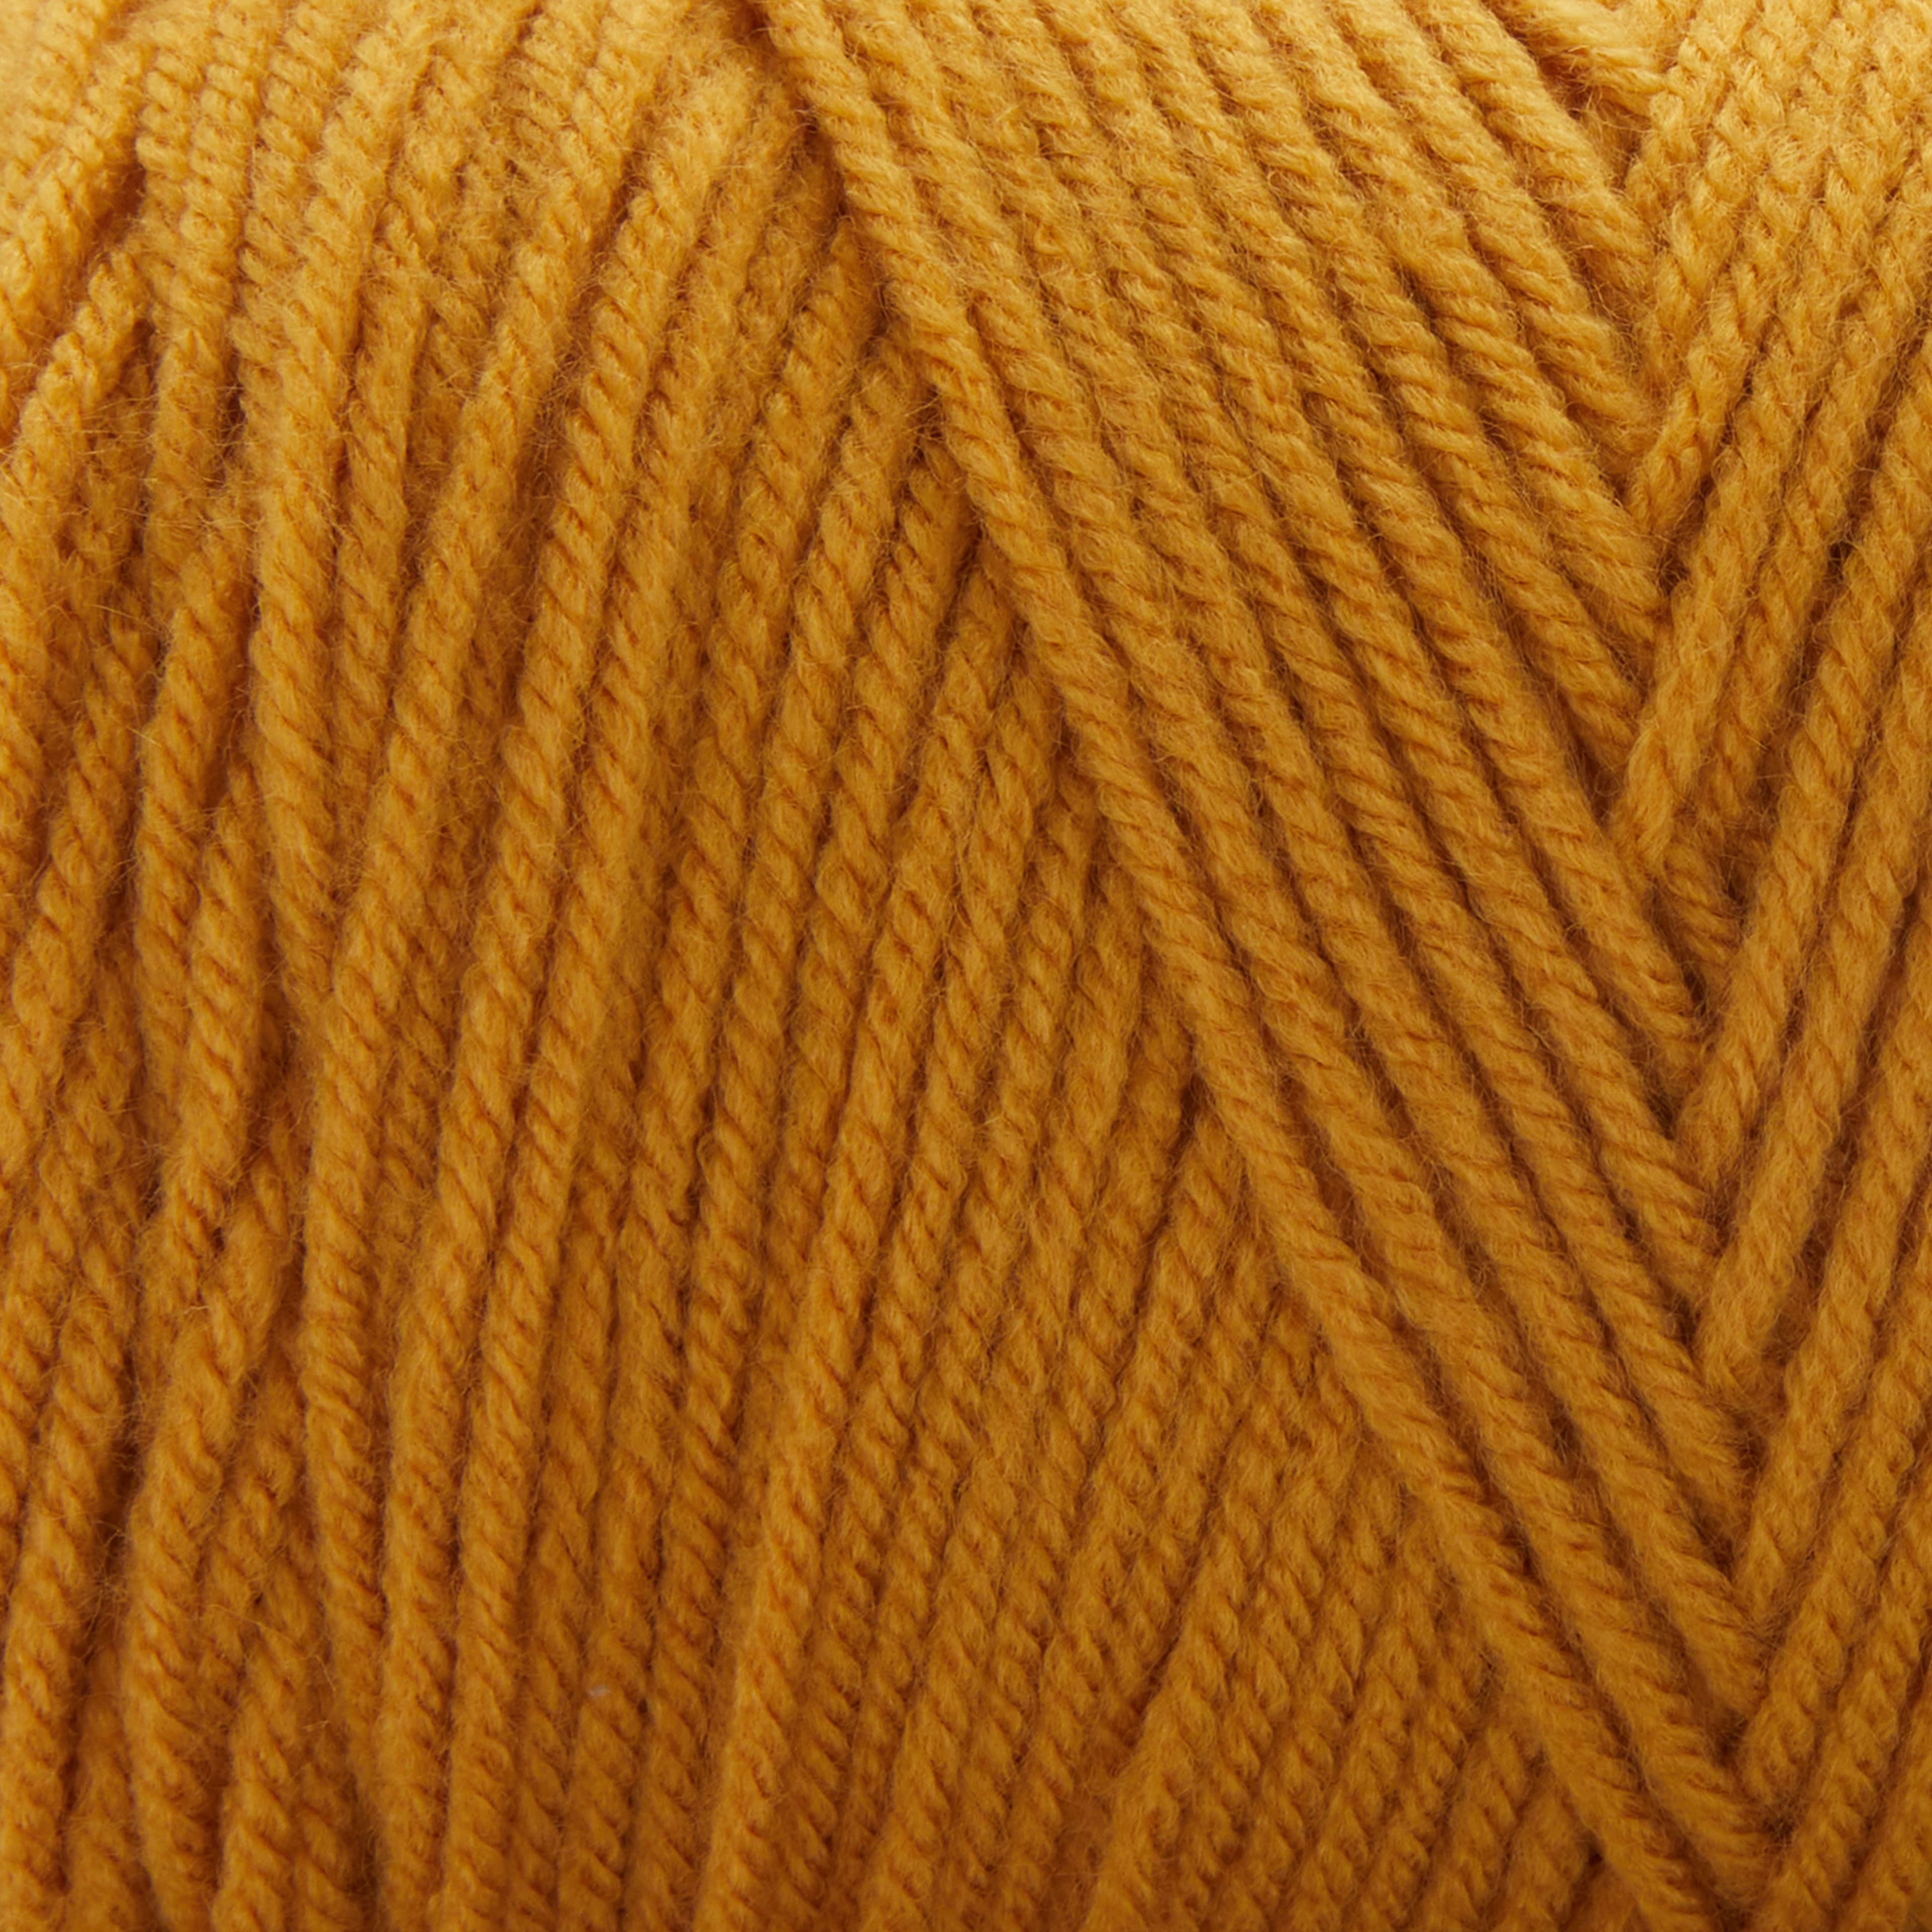 Loops & Threads Soft Classic Yarn 3 Pack “Ginger”